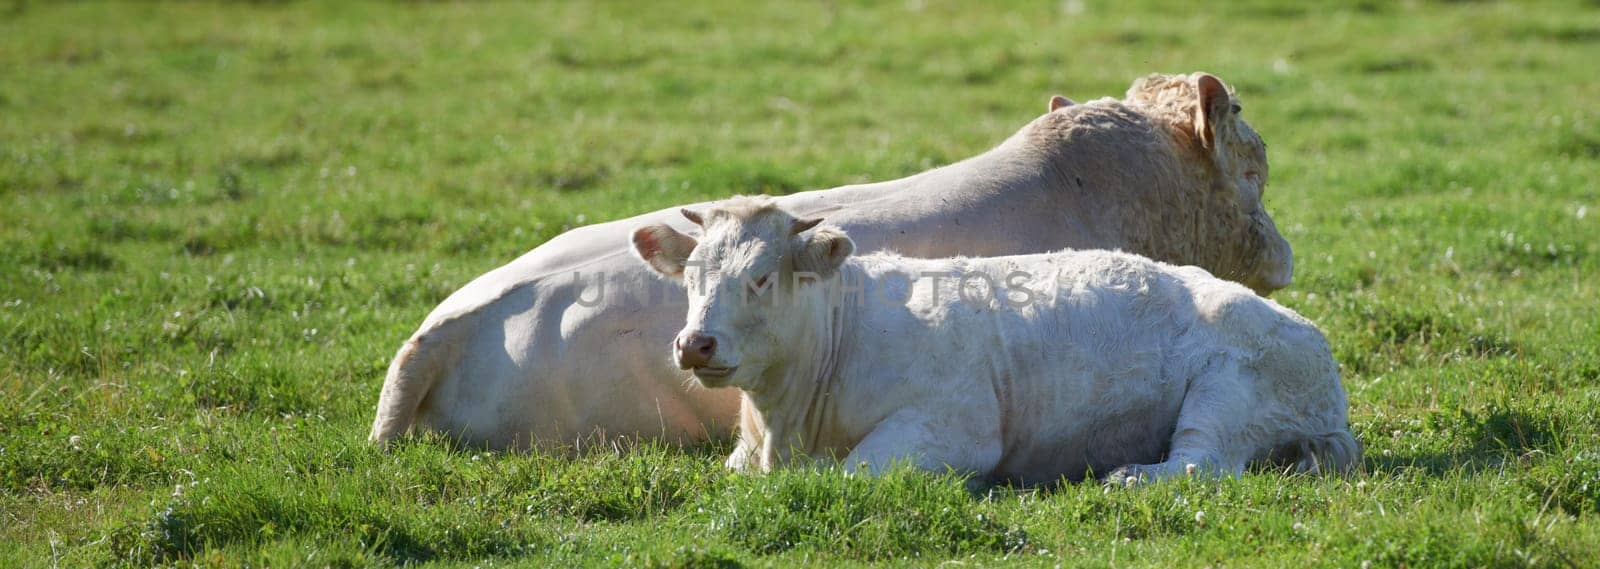 Two white cows roaming and resting on sustainable farm in pasture field in countryside. Raising and breeding livestock animals in agribusiness for free range organic cattle and dairy industry.